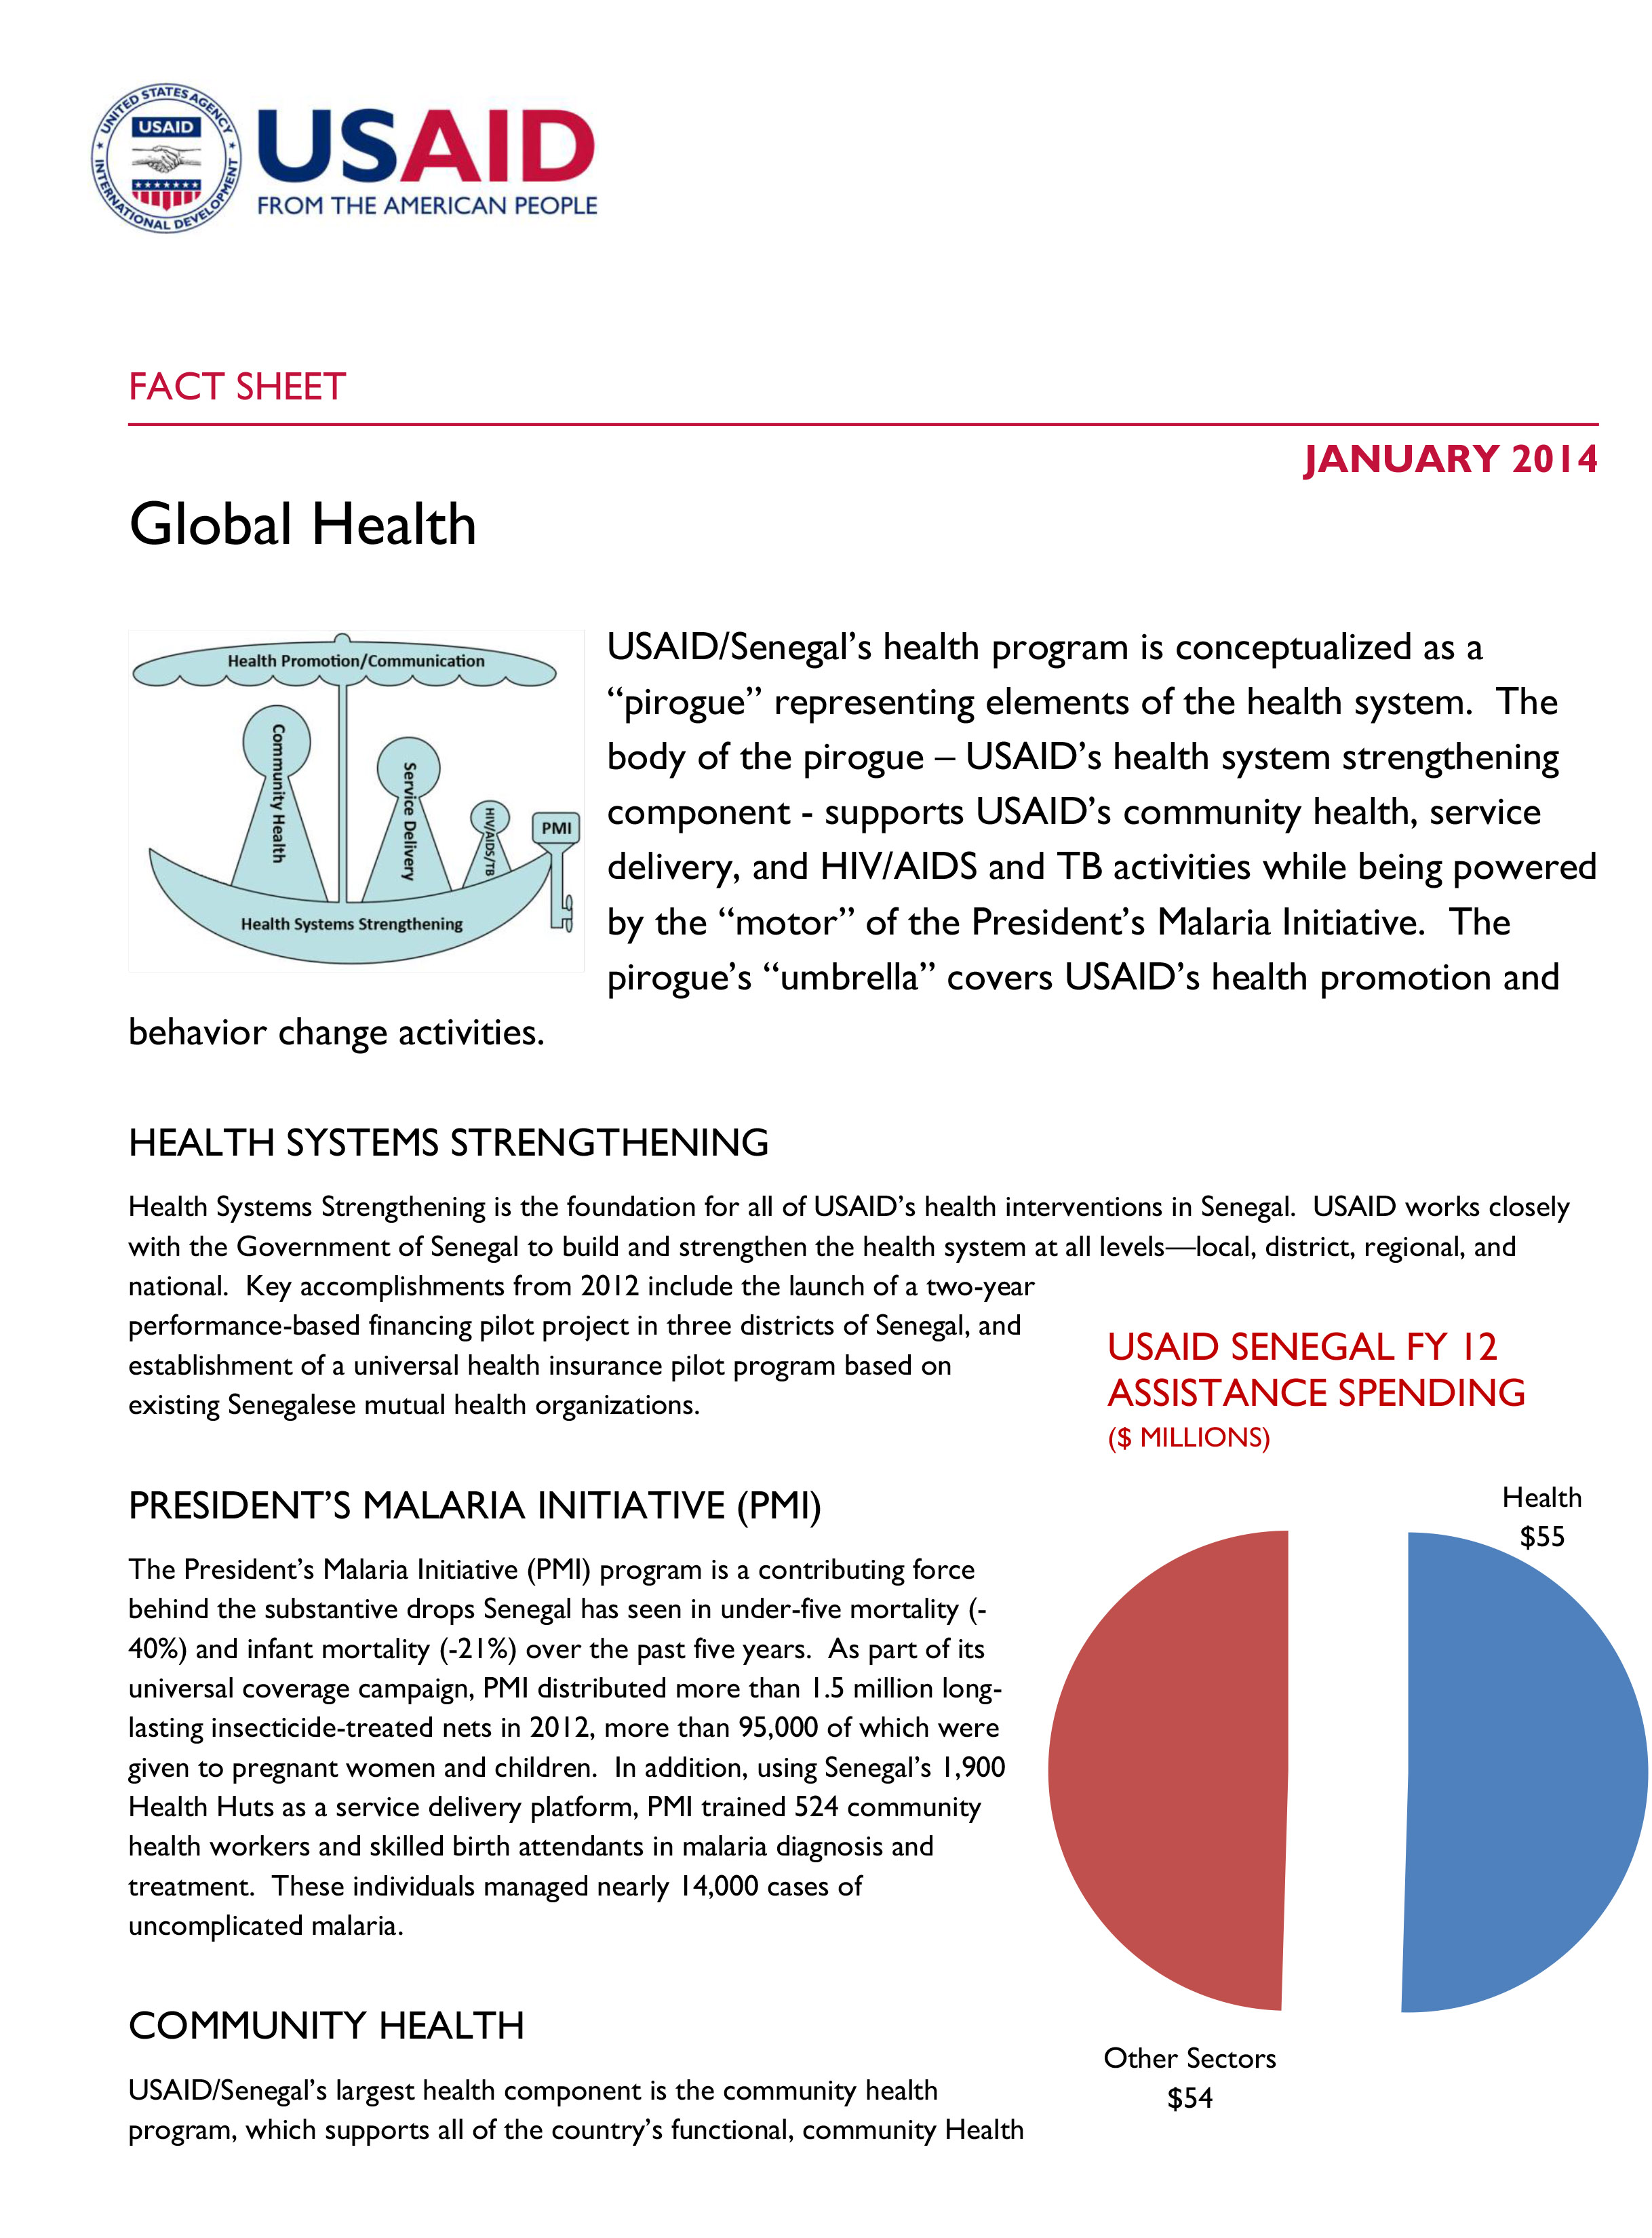 A print-ready downloadable version of USAID Senegal's Global Health Fact Sheet